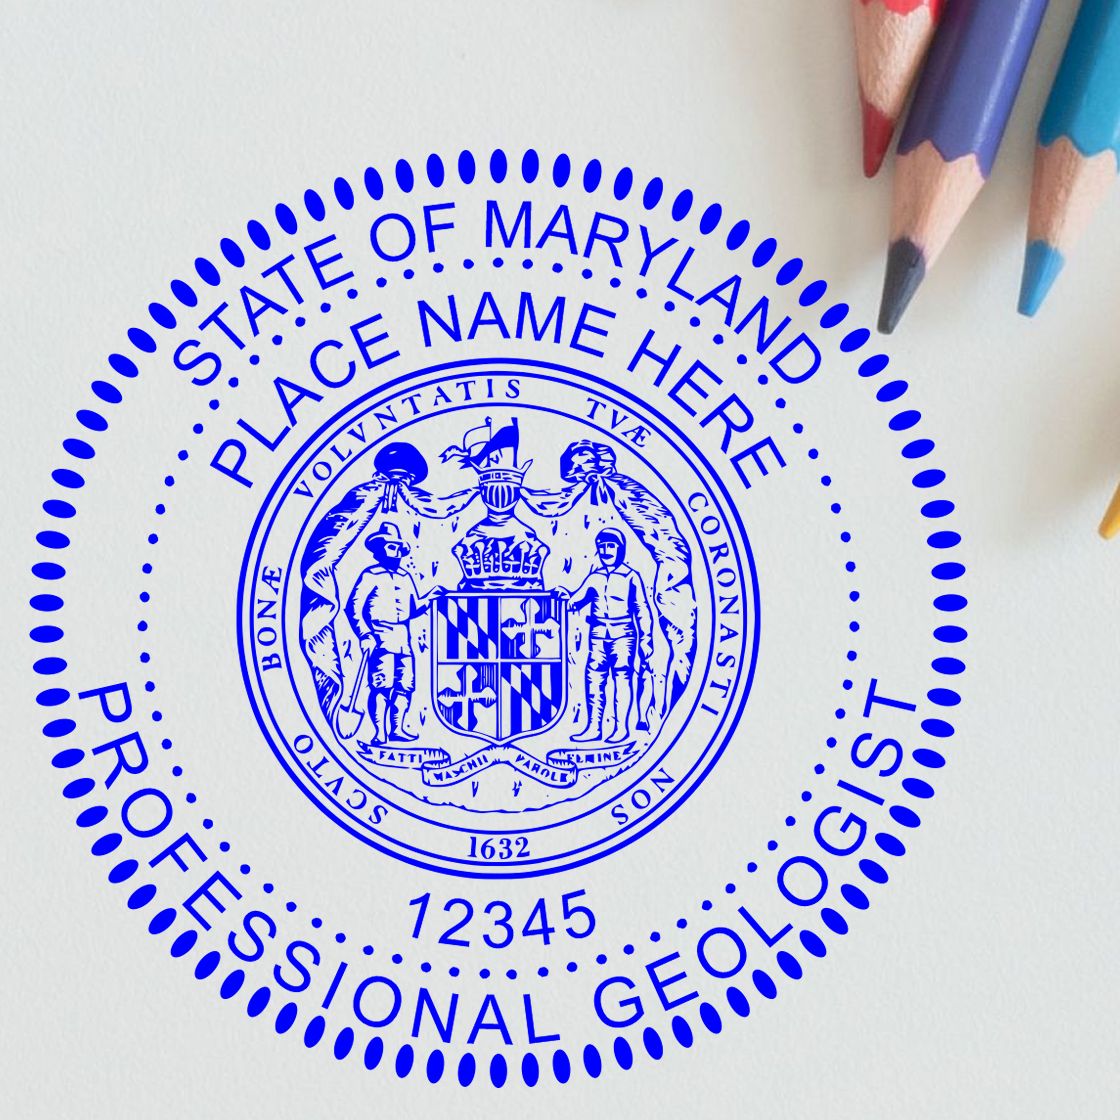 The Slim Pre-Inked Maryland Professional Geologist Seal Stamp stamp impression comes to life with a crisp, detailed image stamped on paper - showcasing true professional quality.